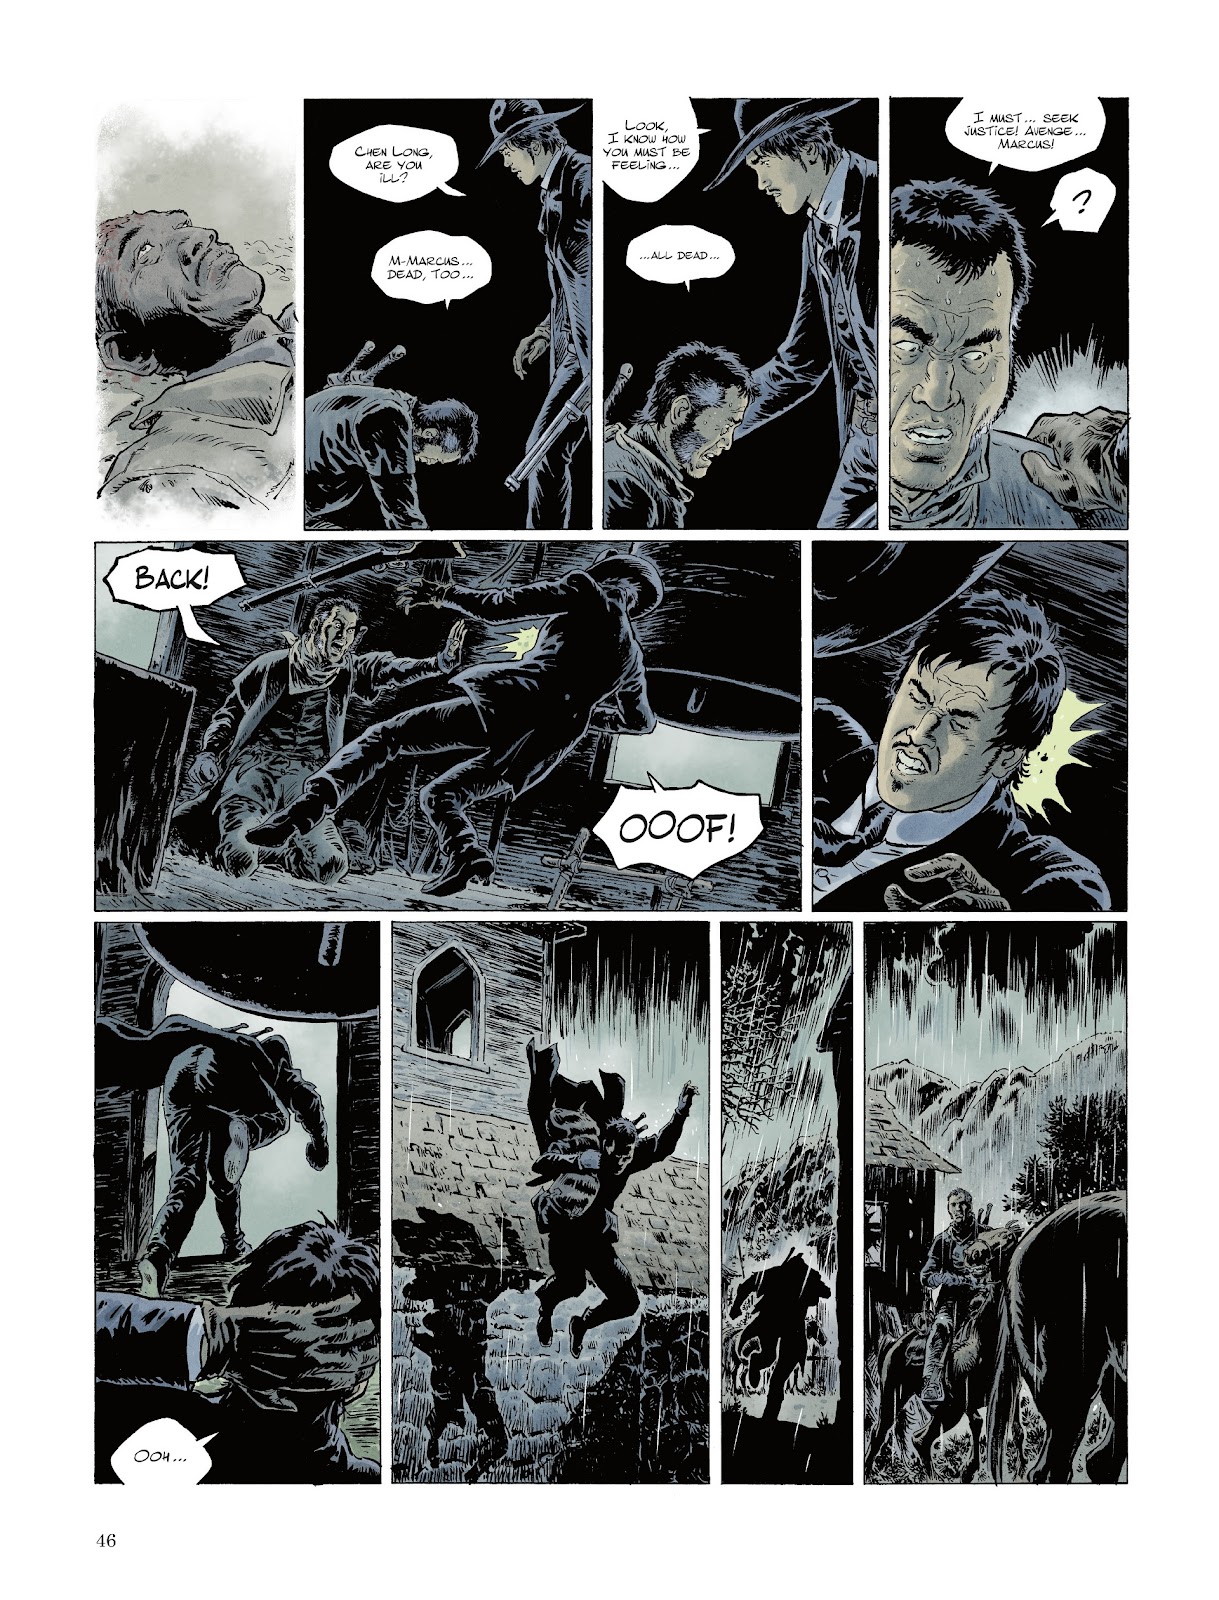 The Tiger Awakens: The Return of John Chinaman issue 1 - Page 47